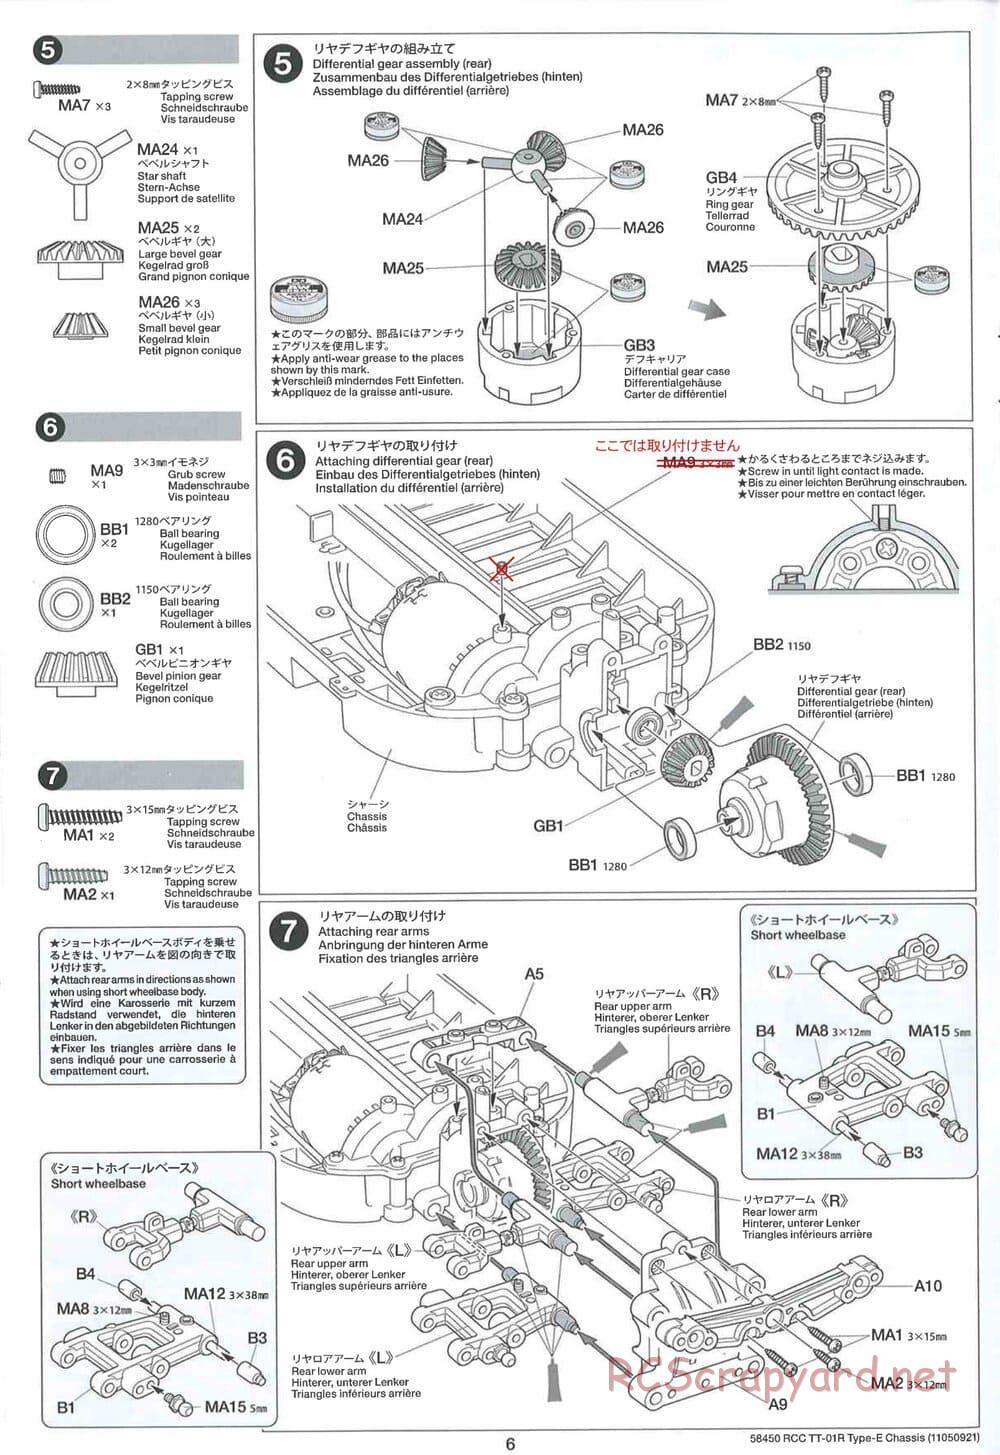 Tamiya - TT-01R Type-E Chassis - Manual - Page 6